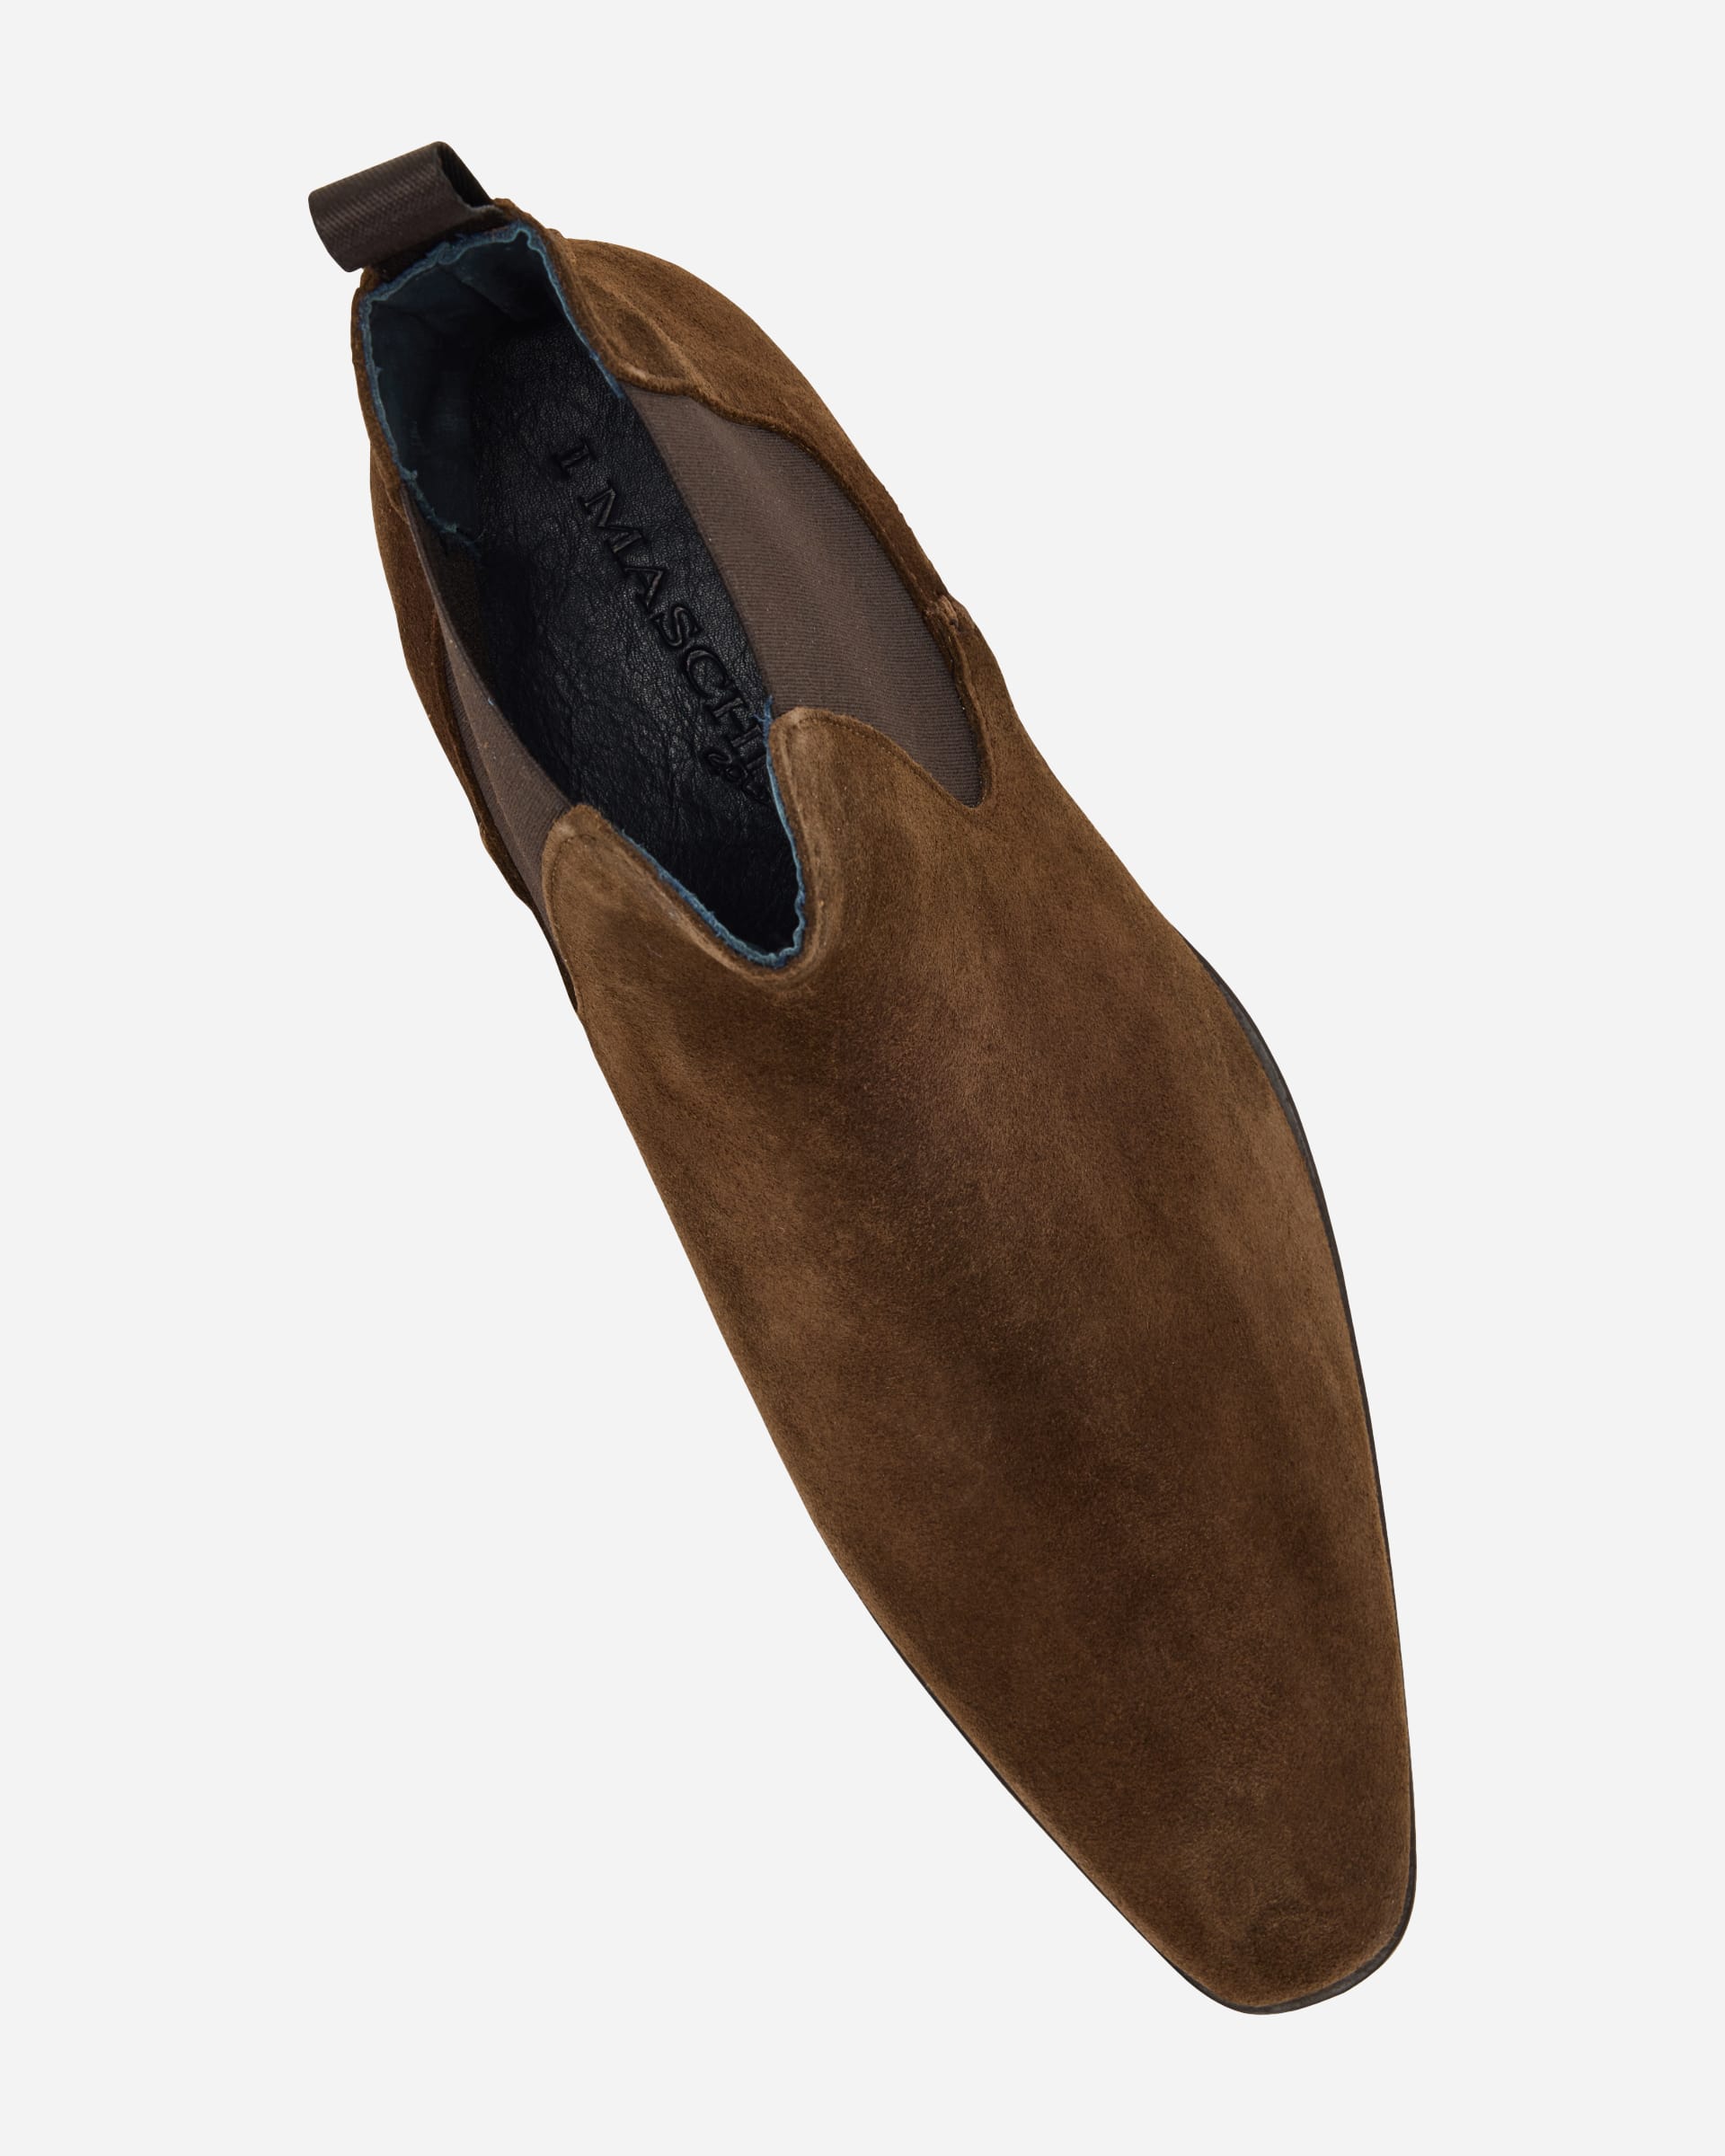 I Maschi Brown Suede Chelsea Boot - Men's Shoes at Menzclub